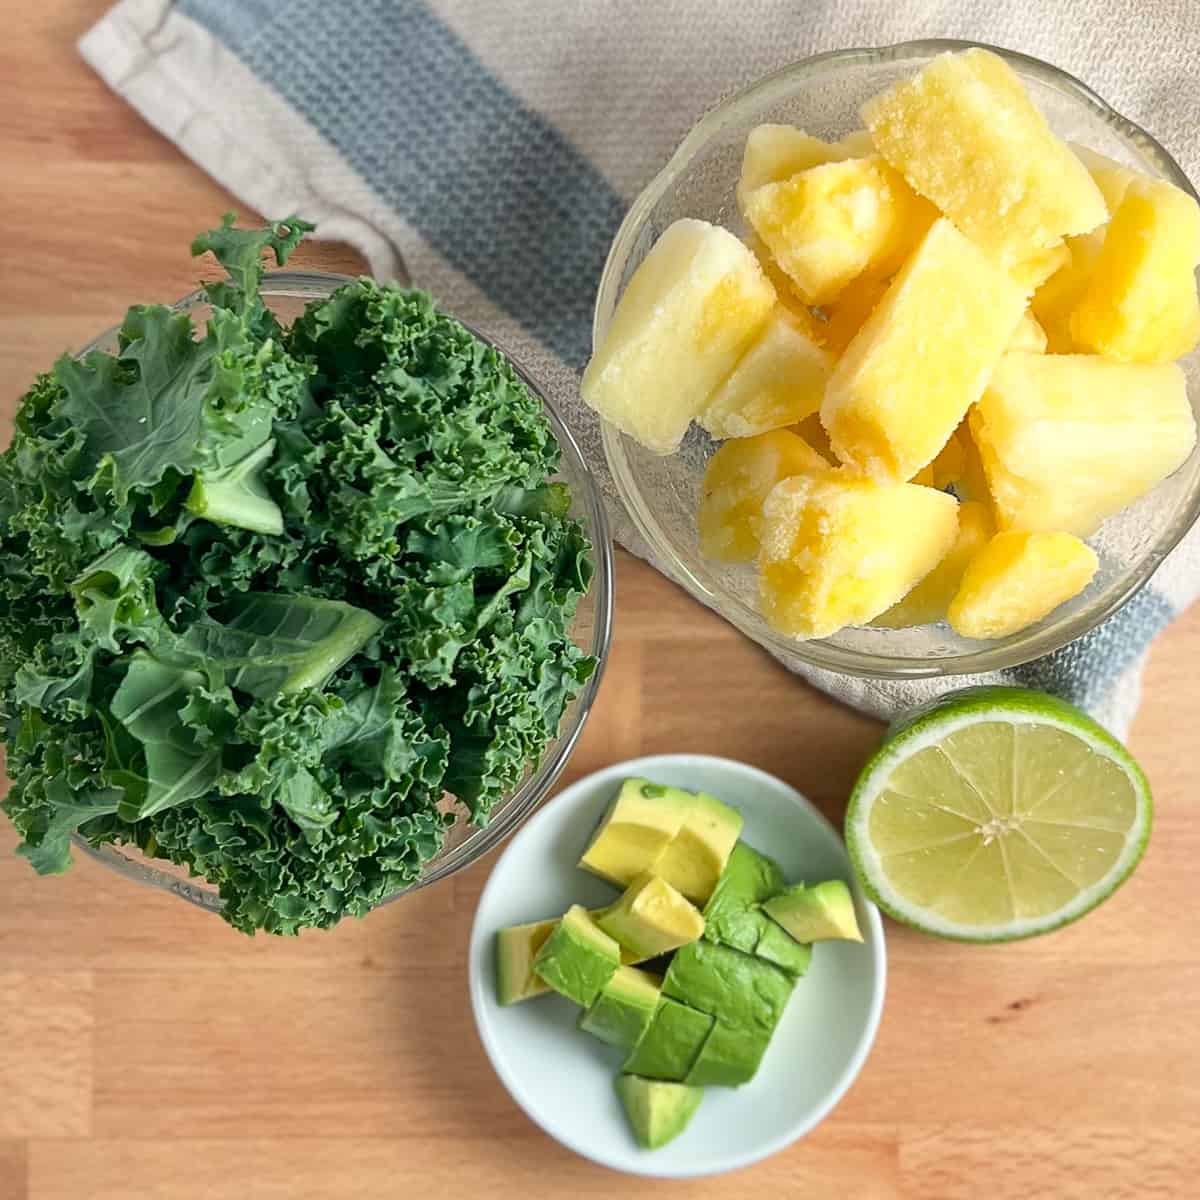 top view of ingredients for kale smoothie: kale, frozen pineapple chunks, avocado, lime